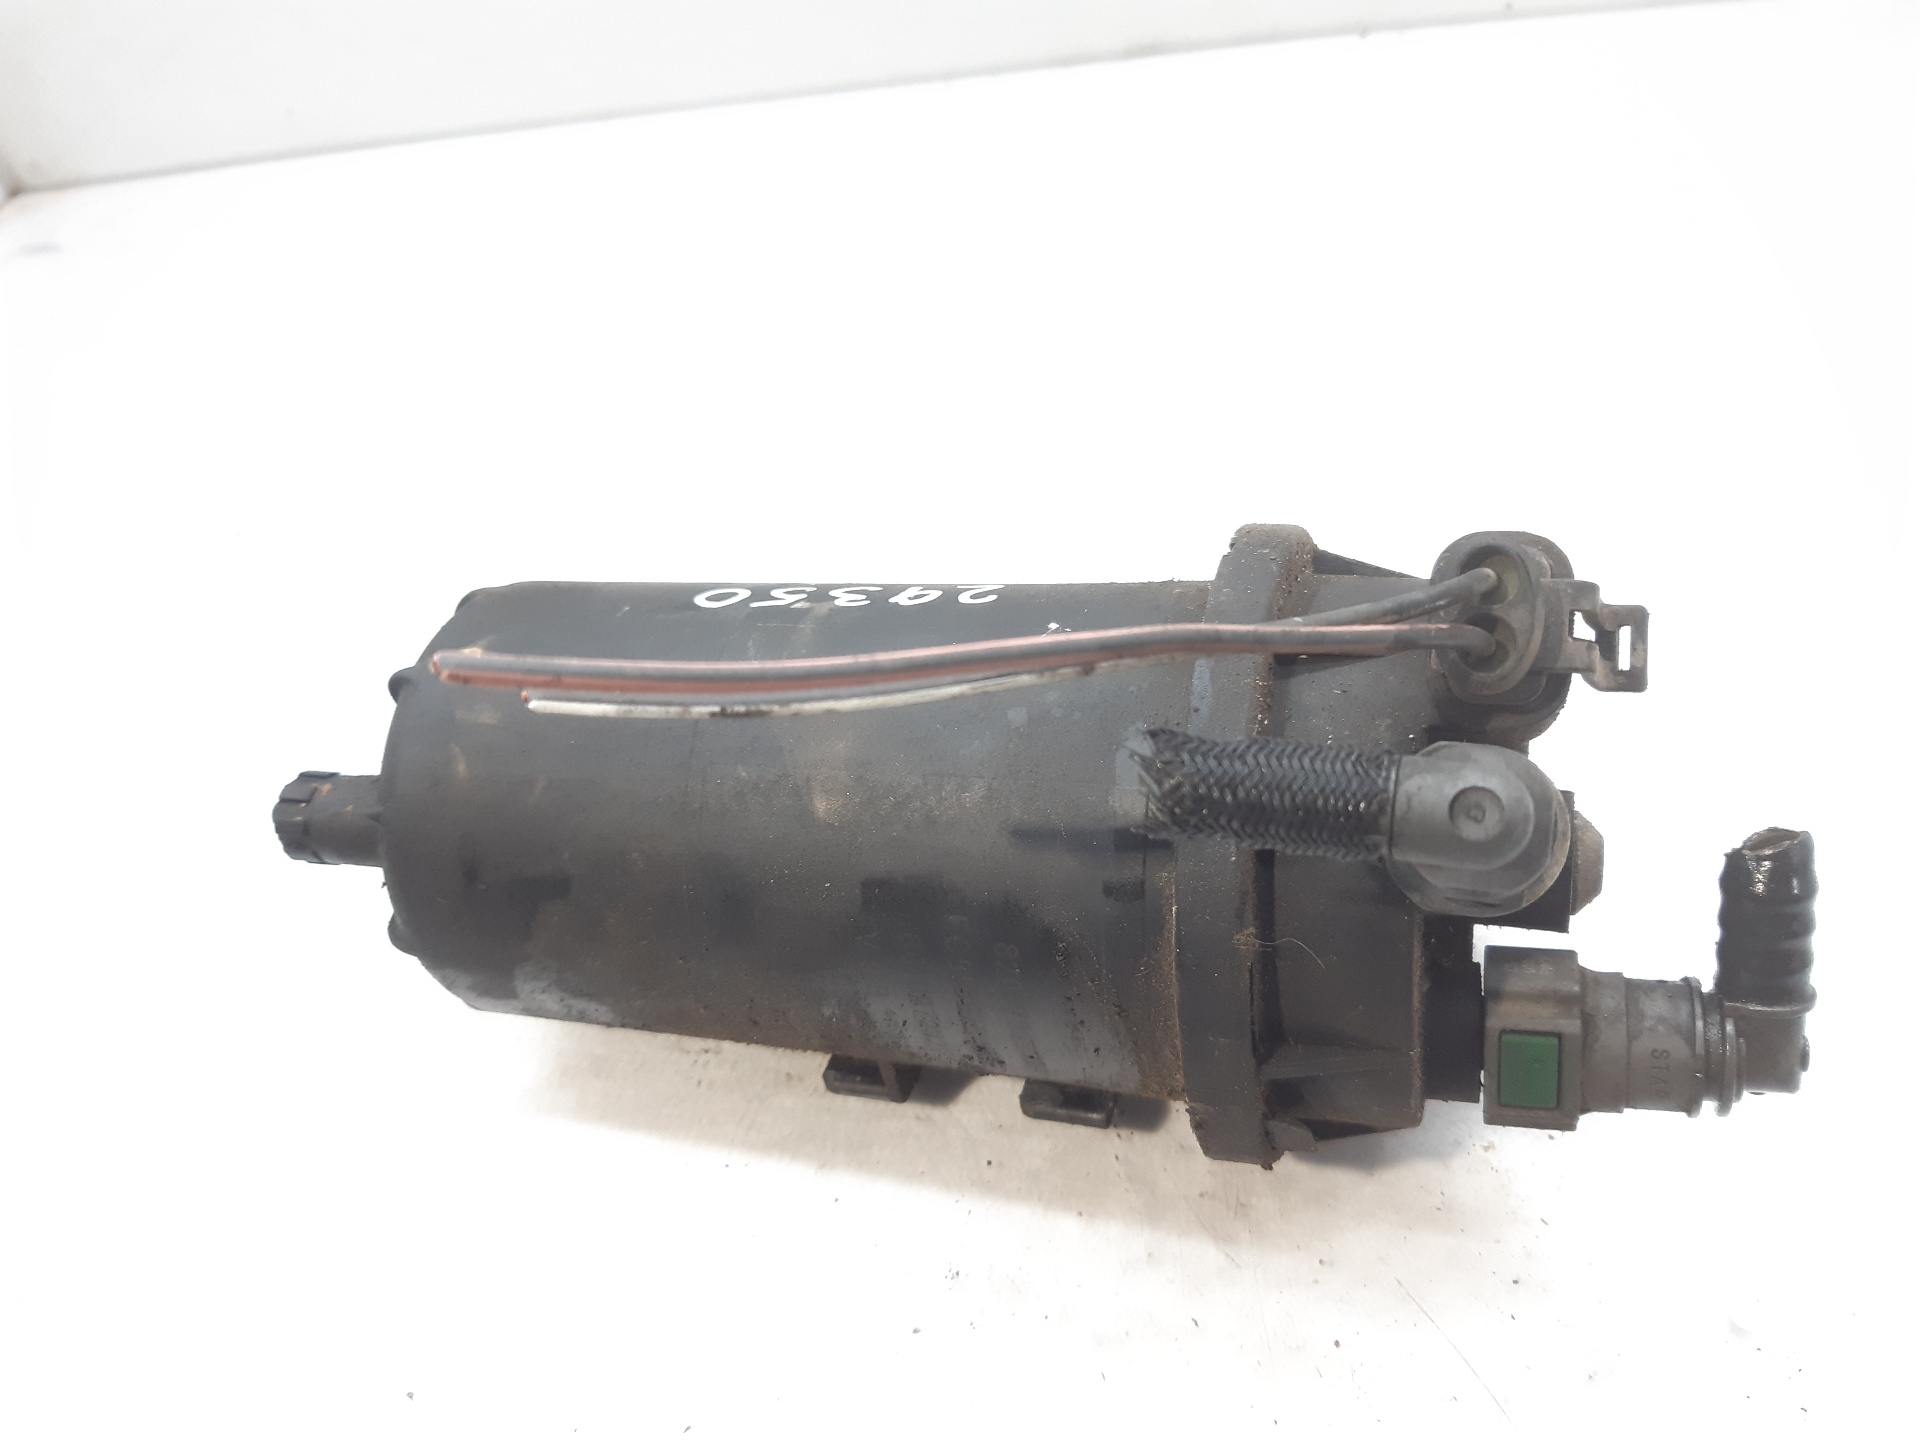 RENAULT Trafic 2 generation (2001-2015) Other Engine Compartment Parts 8200780972 22464961